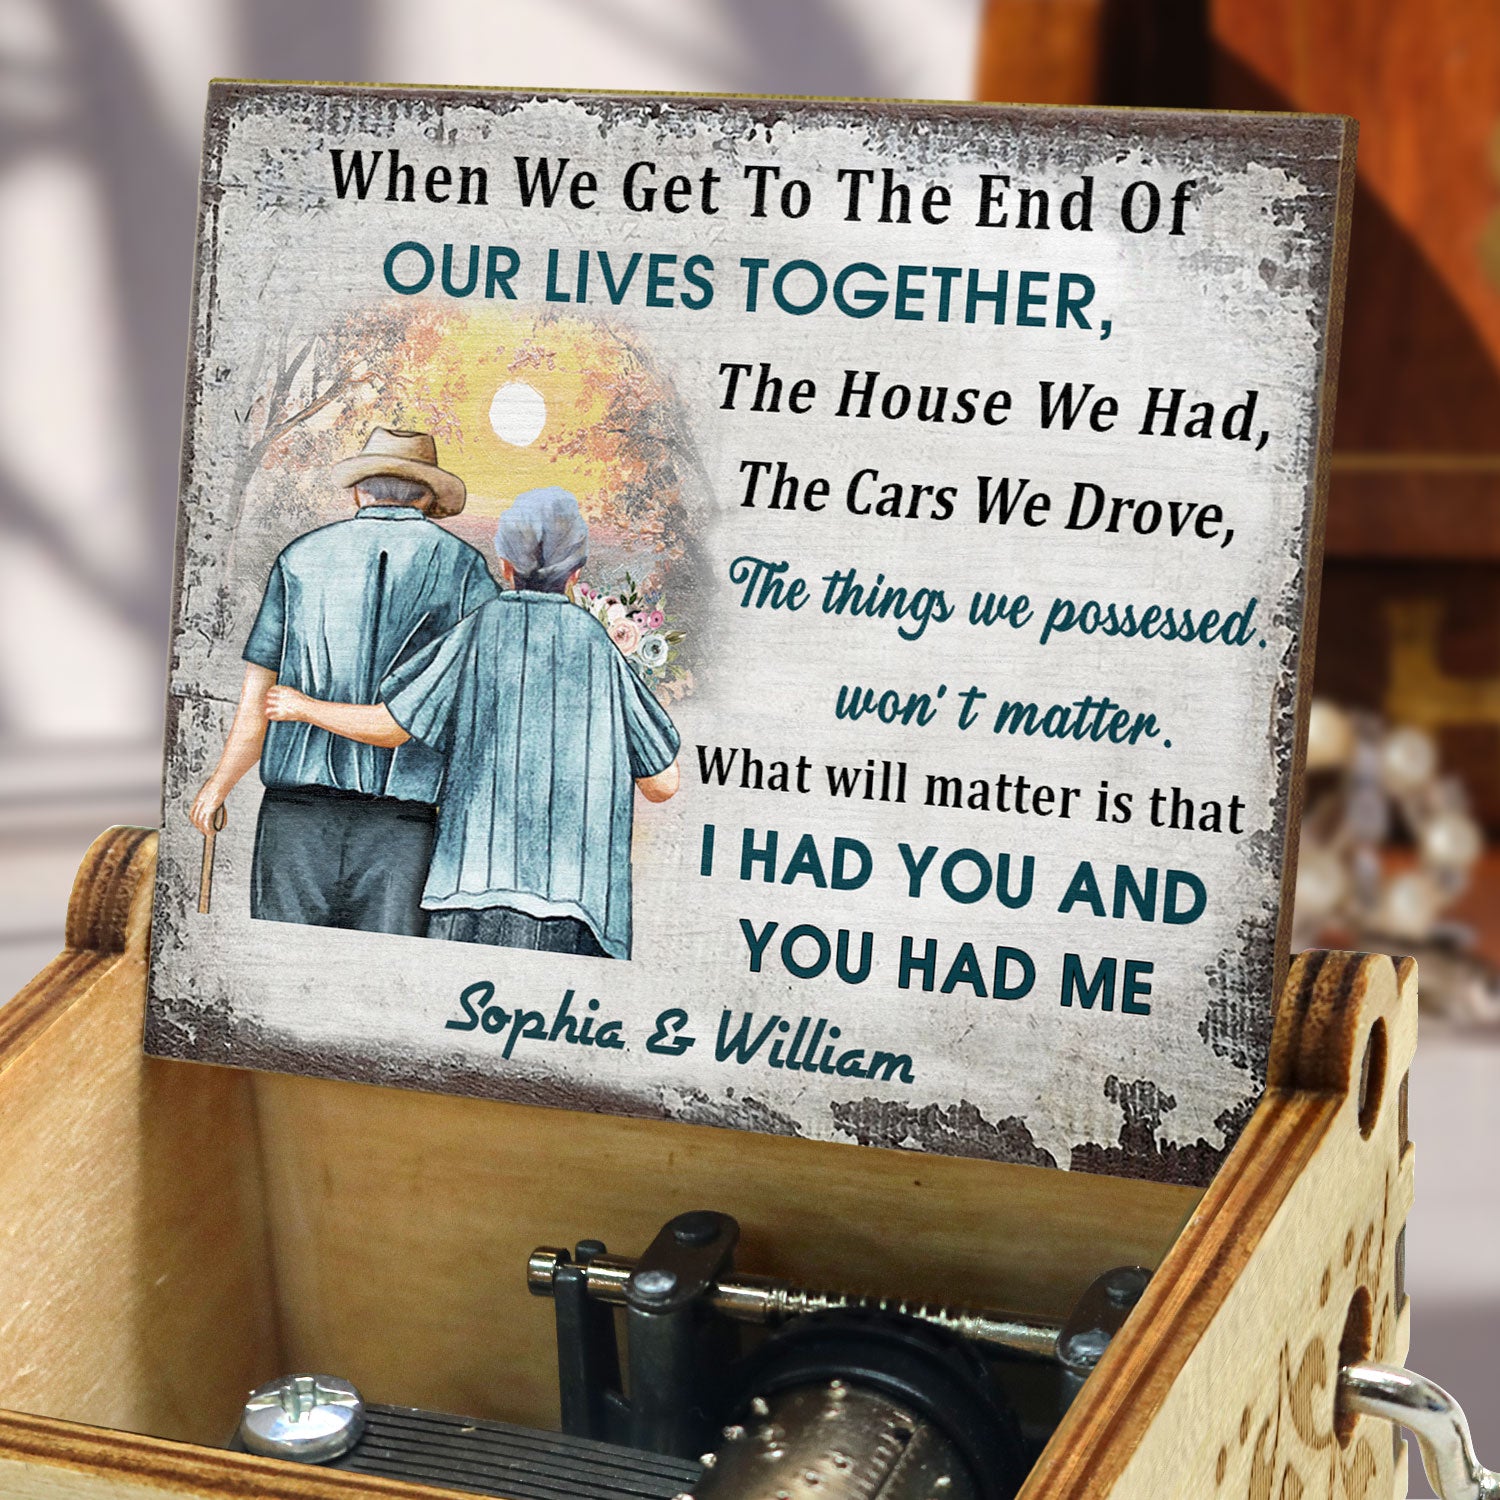 When We Get To The End - Anniversary Gift For Old Couple, Husband, Wife - Personalized Spin Button, Hand Crank Music Box